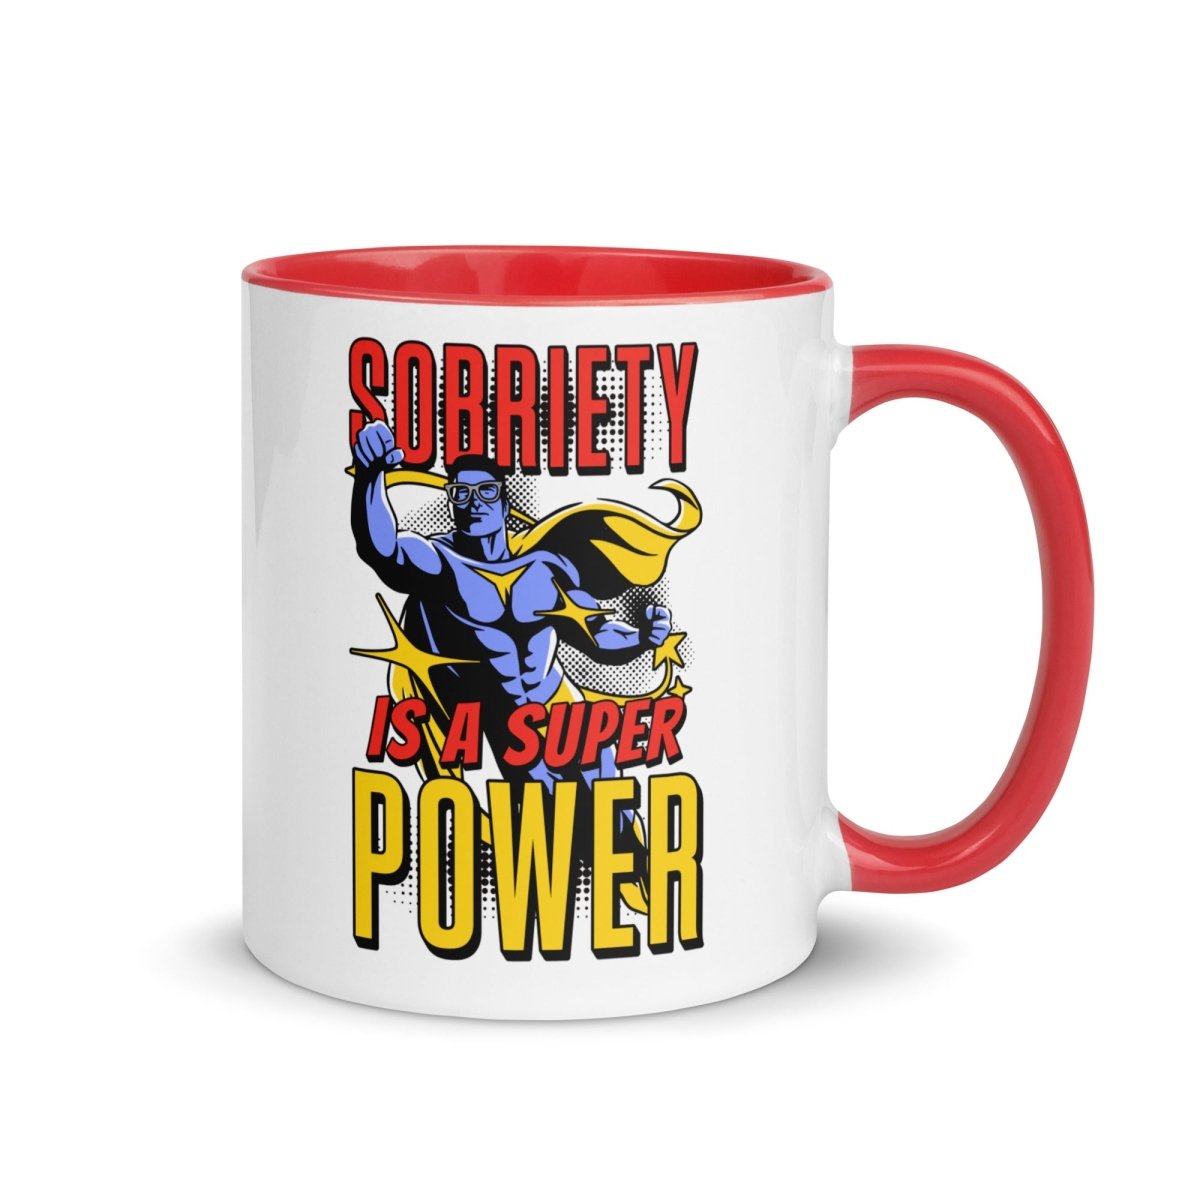 Sobriety Superpower Comic Mug with Color - Empower Your Day - Sobervation